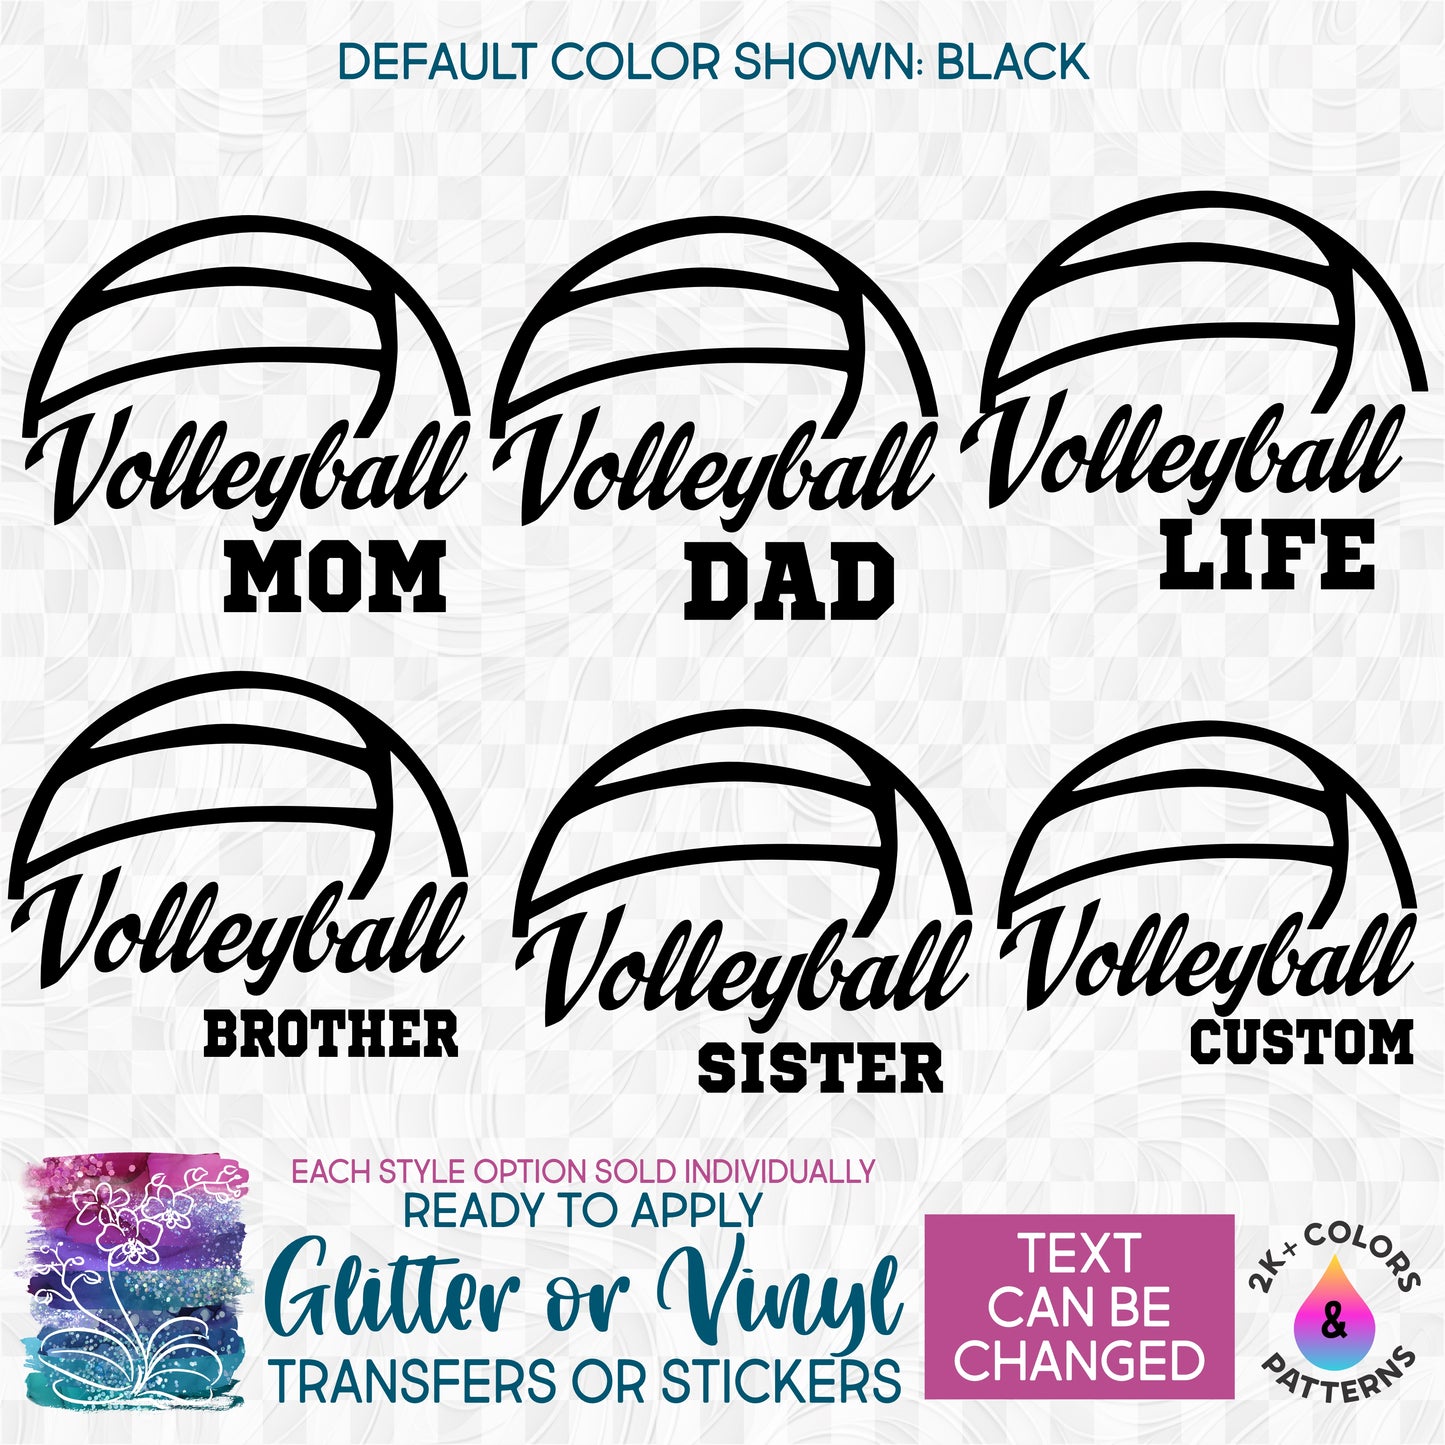 (s054-6C) Volleyball Mom Family Glitter or Vinyl Iron-On Transfer or Sticker